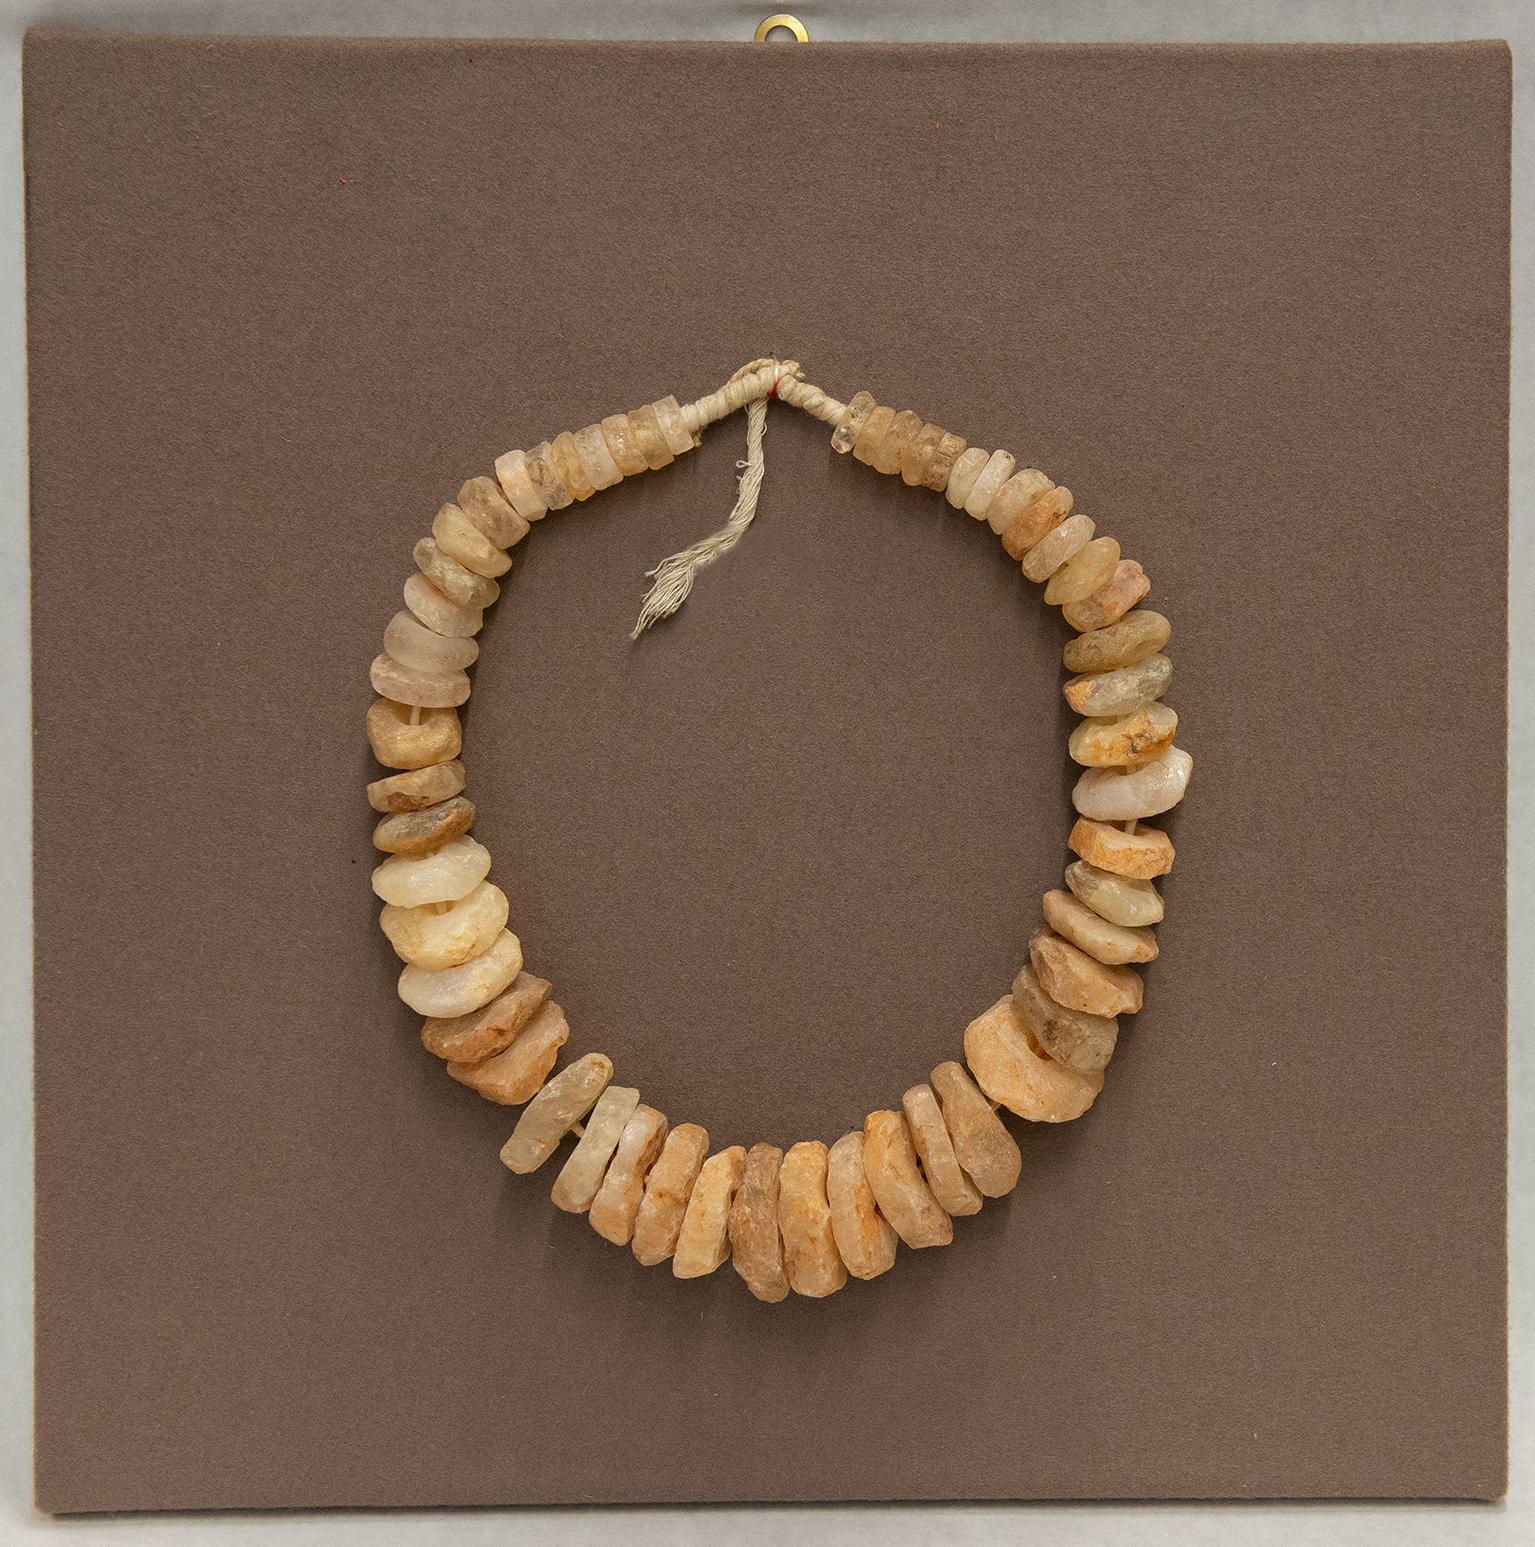 O/4907, Rough vintage necklace, mounted like a sculpture on a wooden panel (cm. 45x 45)
It is a bridal shell money or wedding dowry.
It is possible to obtain different necklaces, if You don't want to put on panel -
It is a very interesting piece for